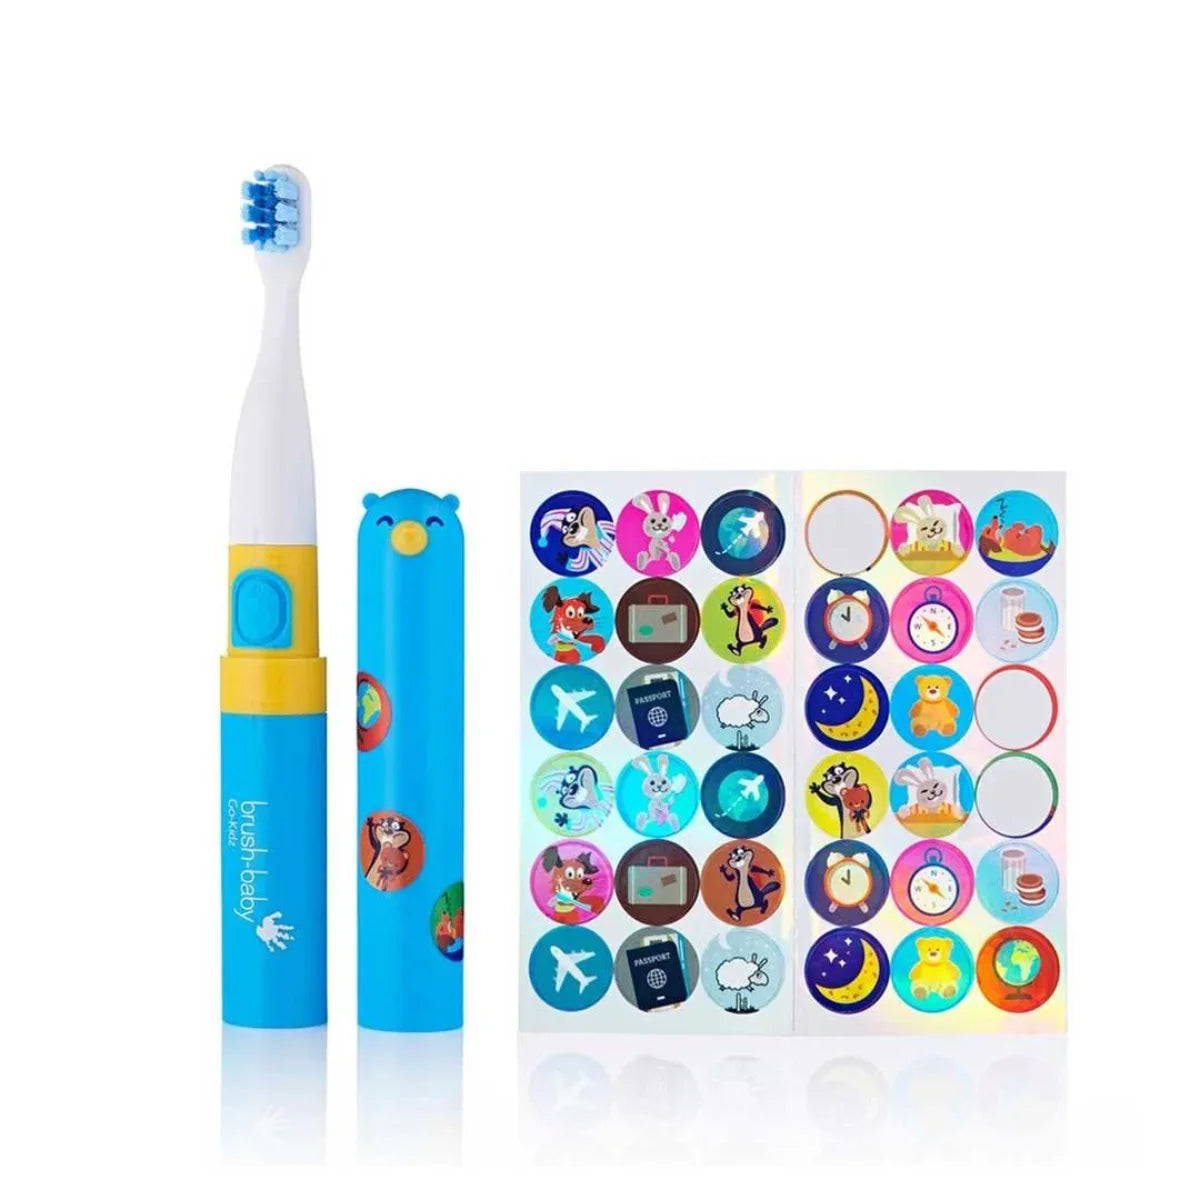 BrushBaby Go-Kidz travel Kids Electric ToothbrushBlue Go-Kidz Travel Electric Toothbrush for Children with brush head cover cap and stickers